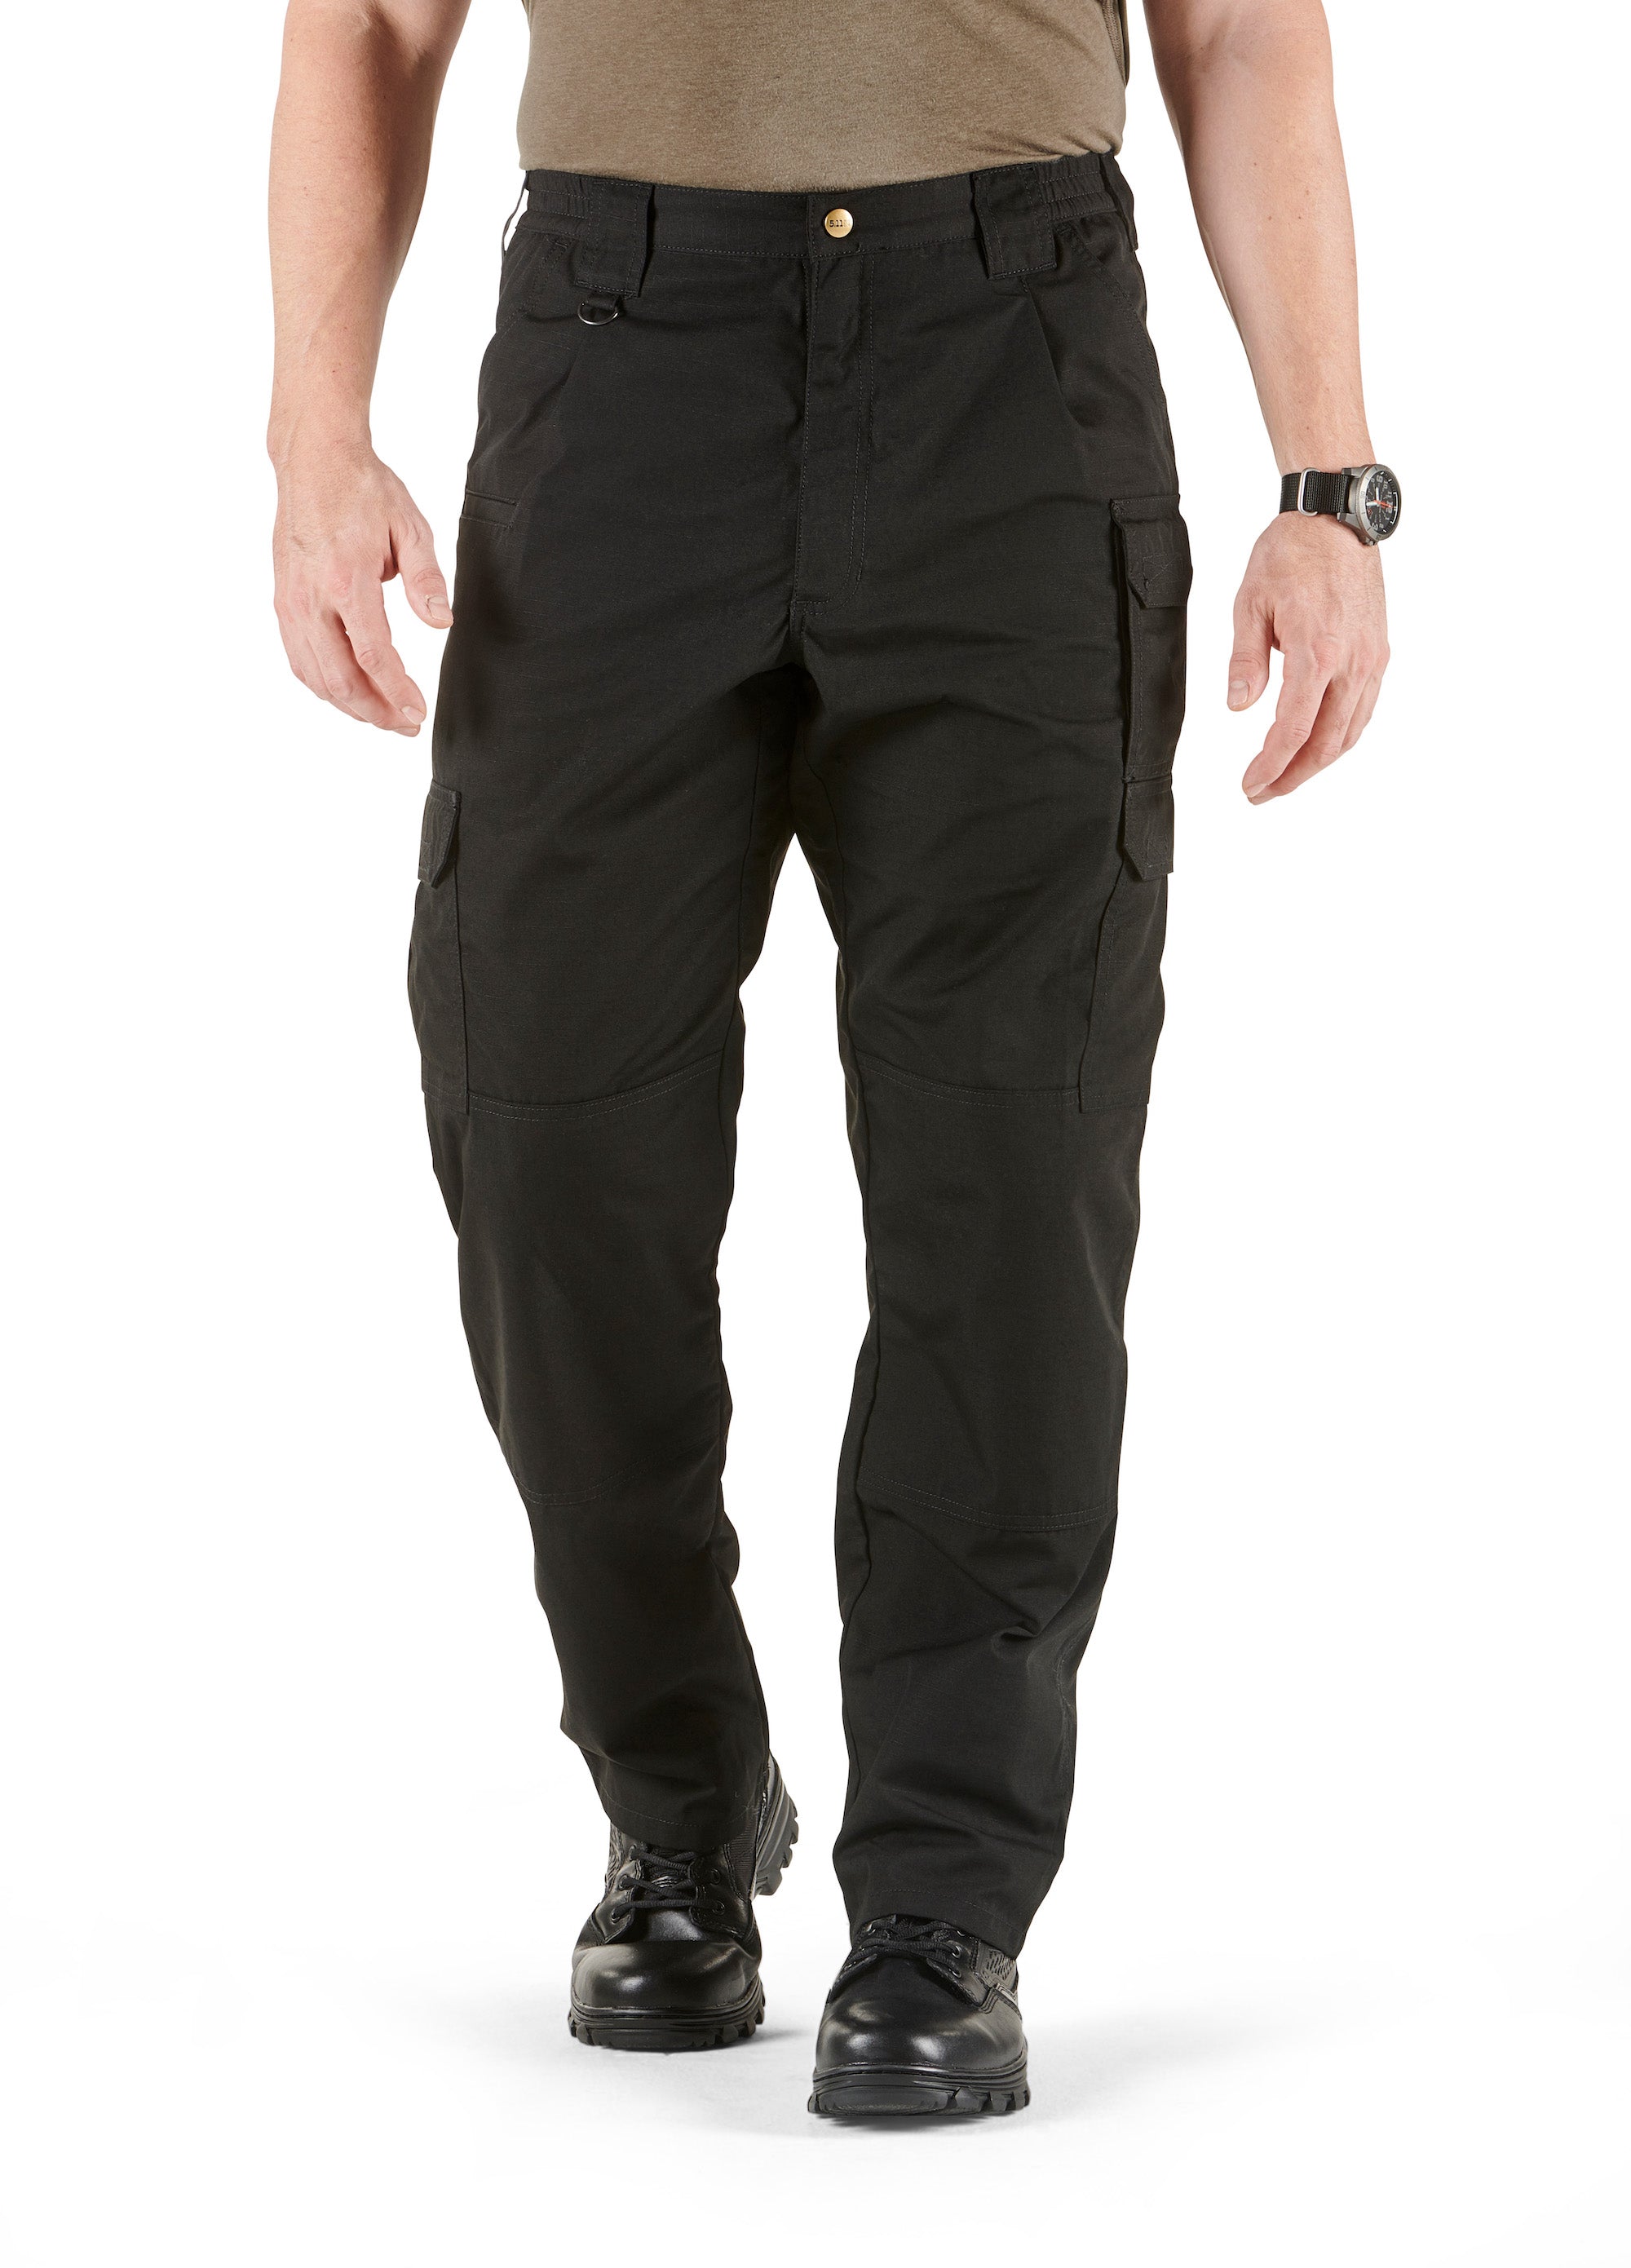 5.11® Tactical Men's Taclite® Pro Pant_Black - Work World - Workwear, Work Boots, Safety Gear